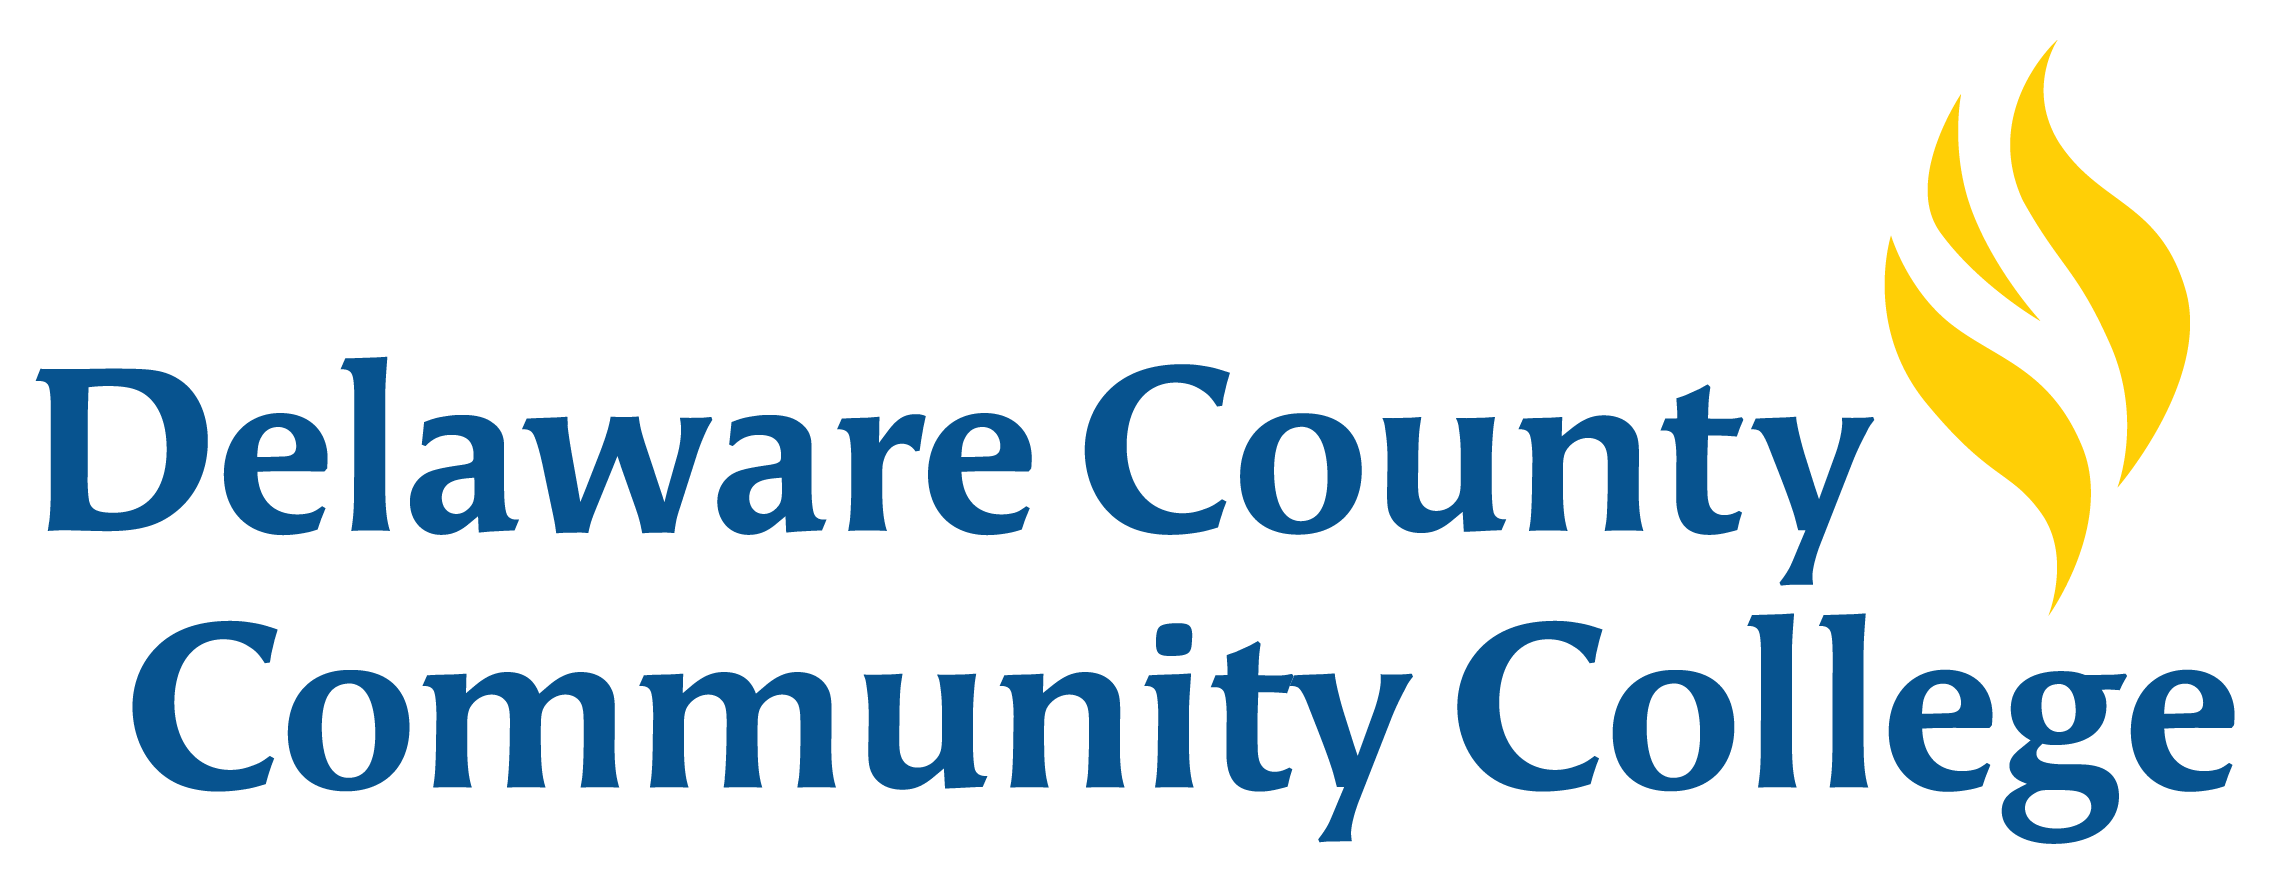 Associate Degree in Business Administration | Associate's degree | Business | Blended Learning | 2 years | Delaware County Community College (DCCC) | USA